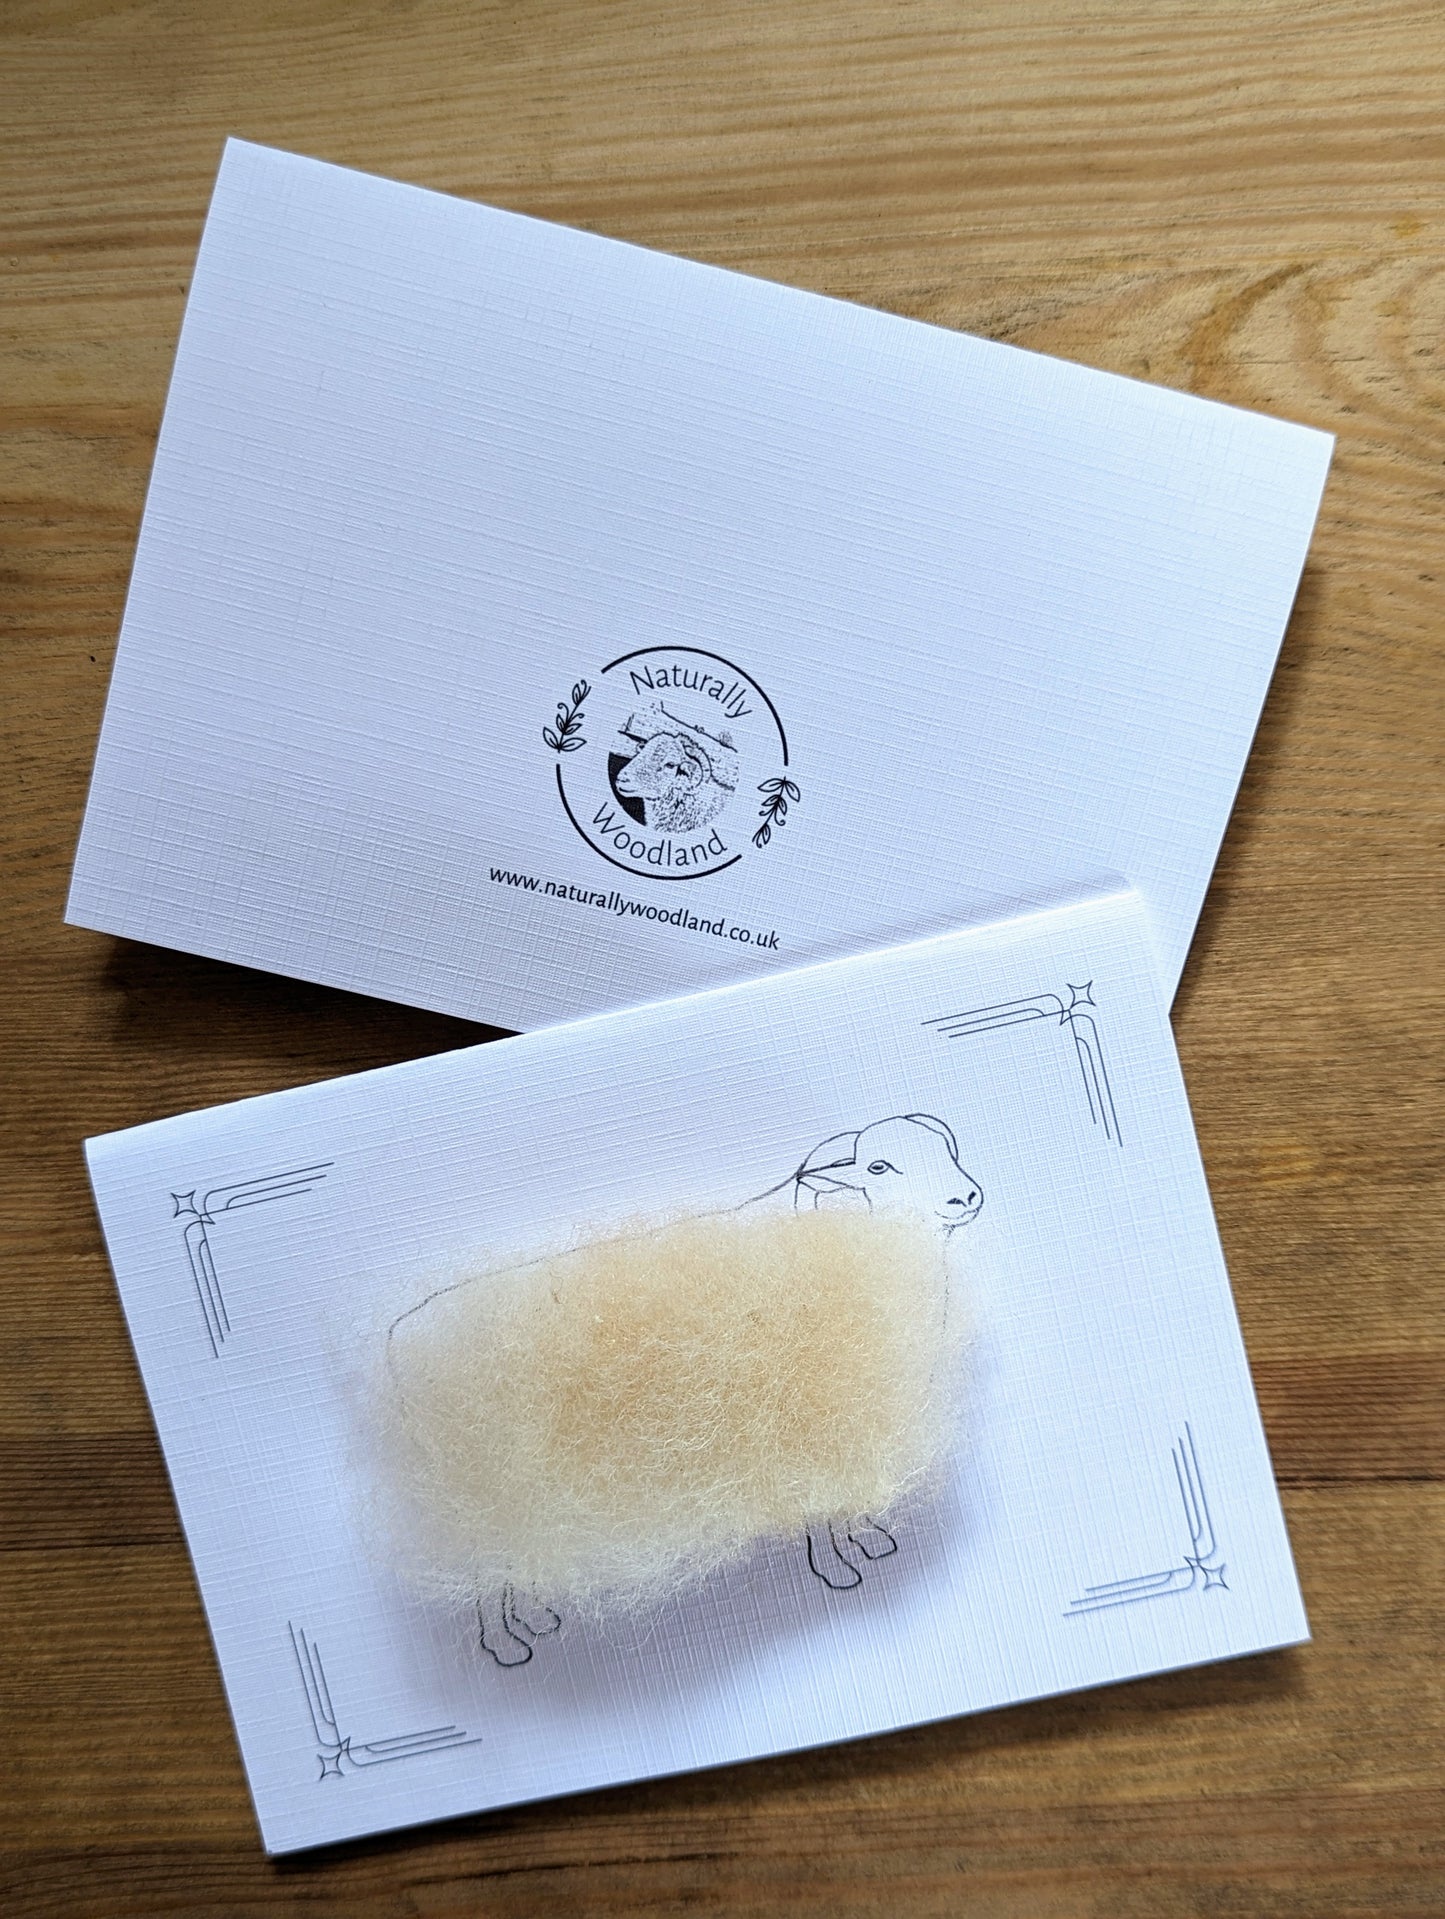 Natural wool products. Handmade sheep greetings card. Woolly sheep with Whitefaced Woodland wool. Happy birthday, thank you card. Handmade in Yorkshire.